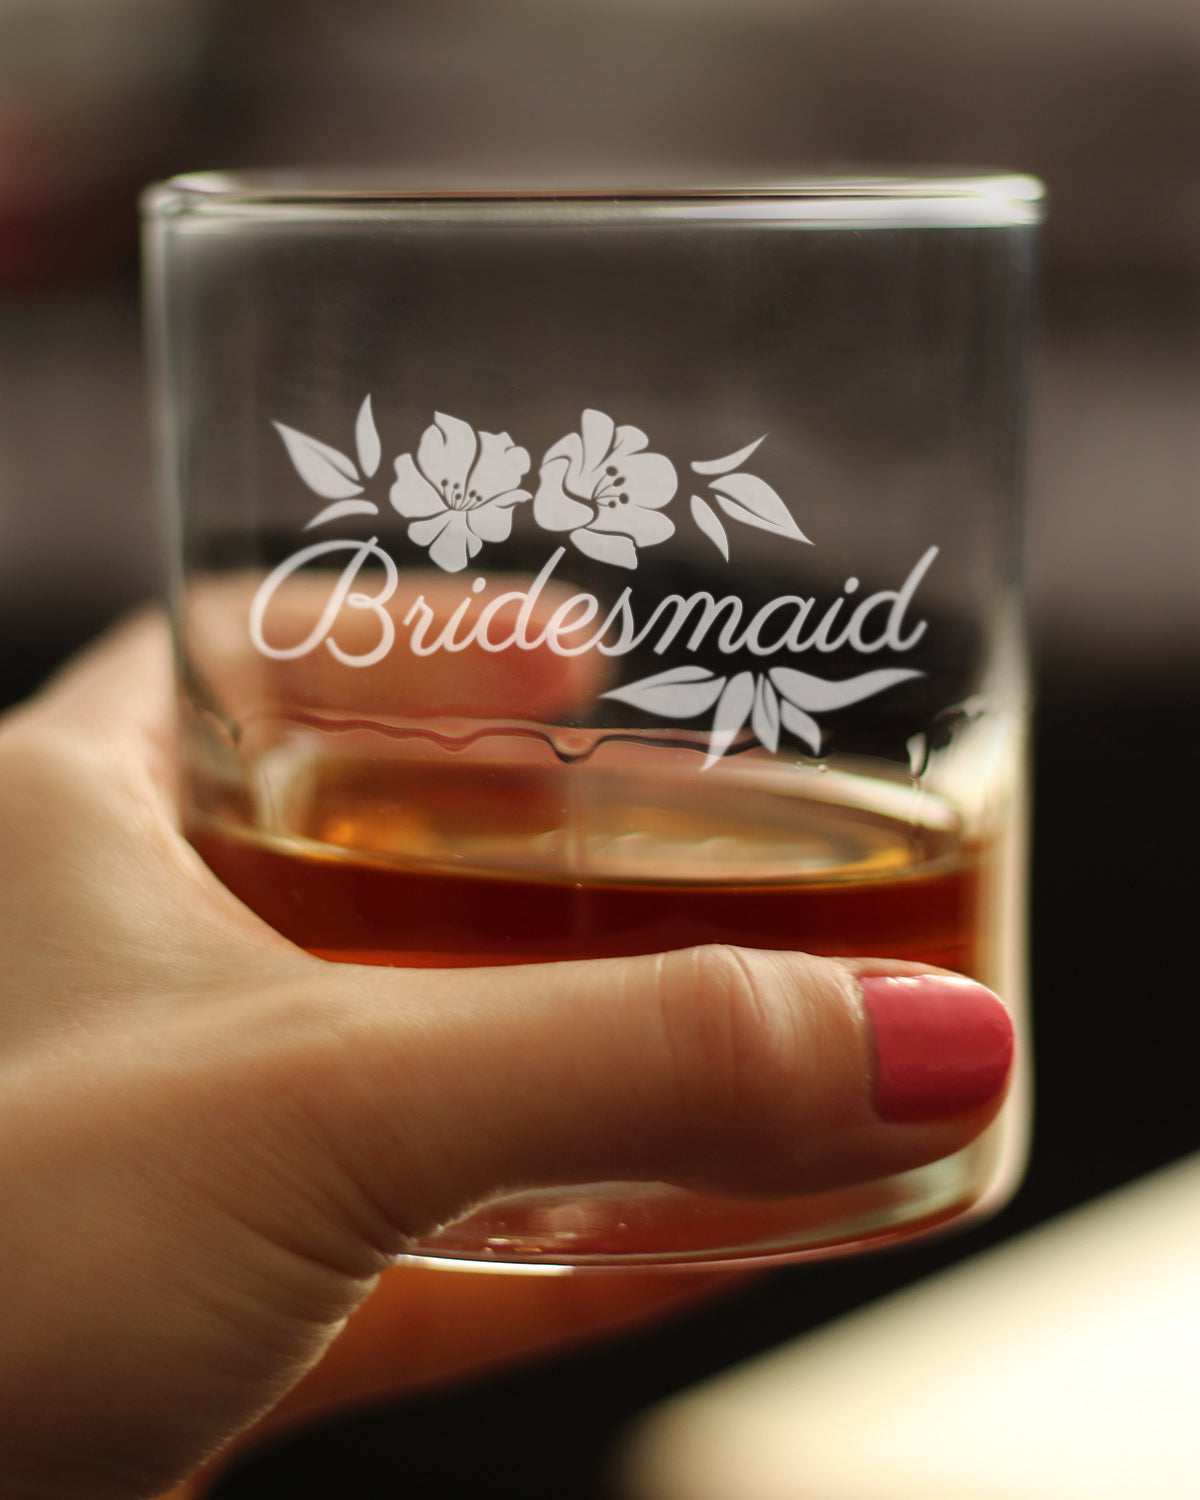 Bridesmaid Old Fashioned Rocks Glass - Bridesmaids Proposal Gifts - Unique Engraved Wedding Cup Gift